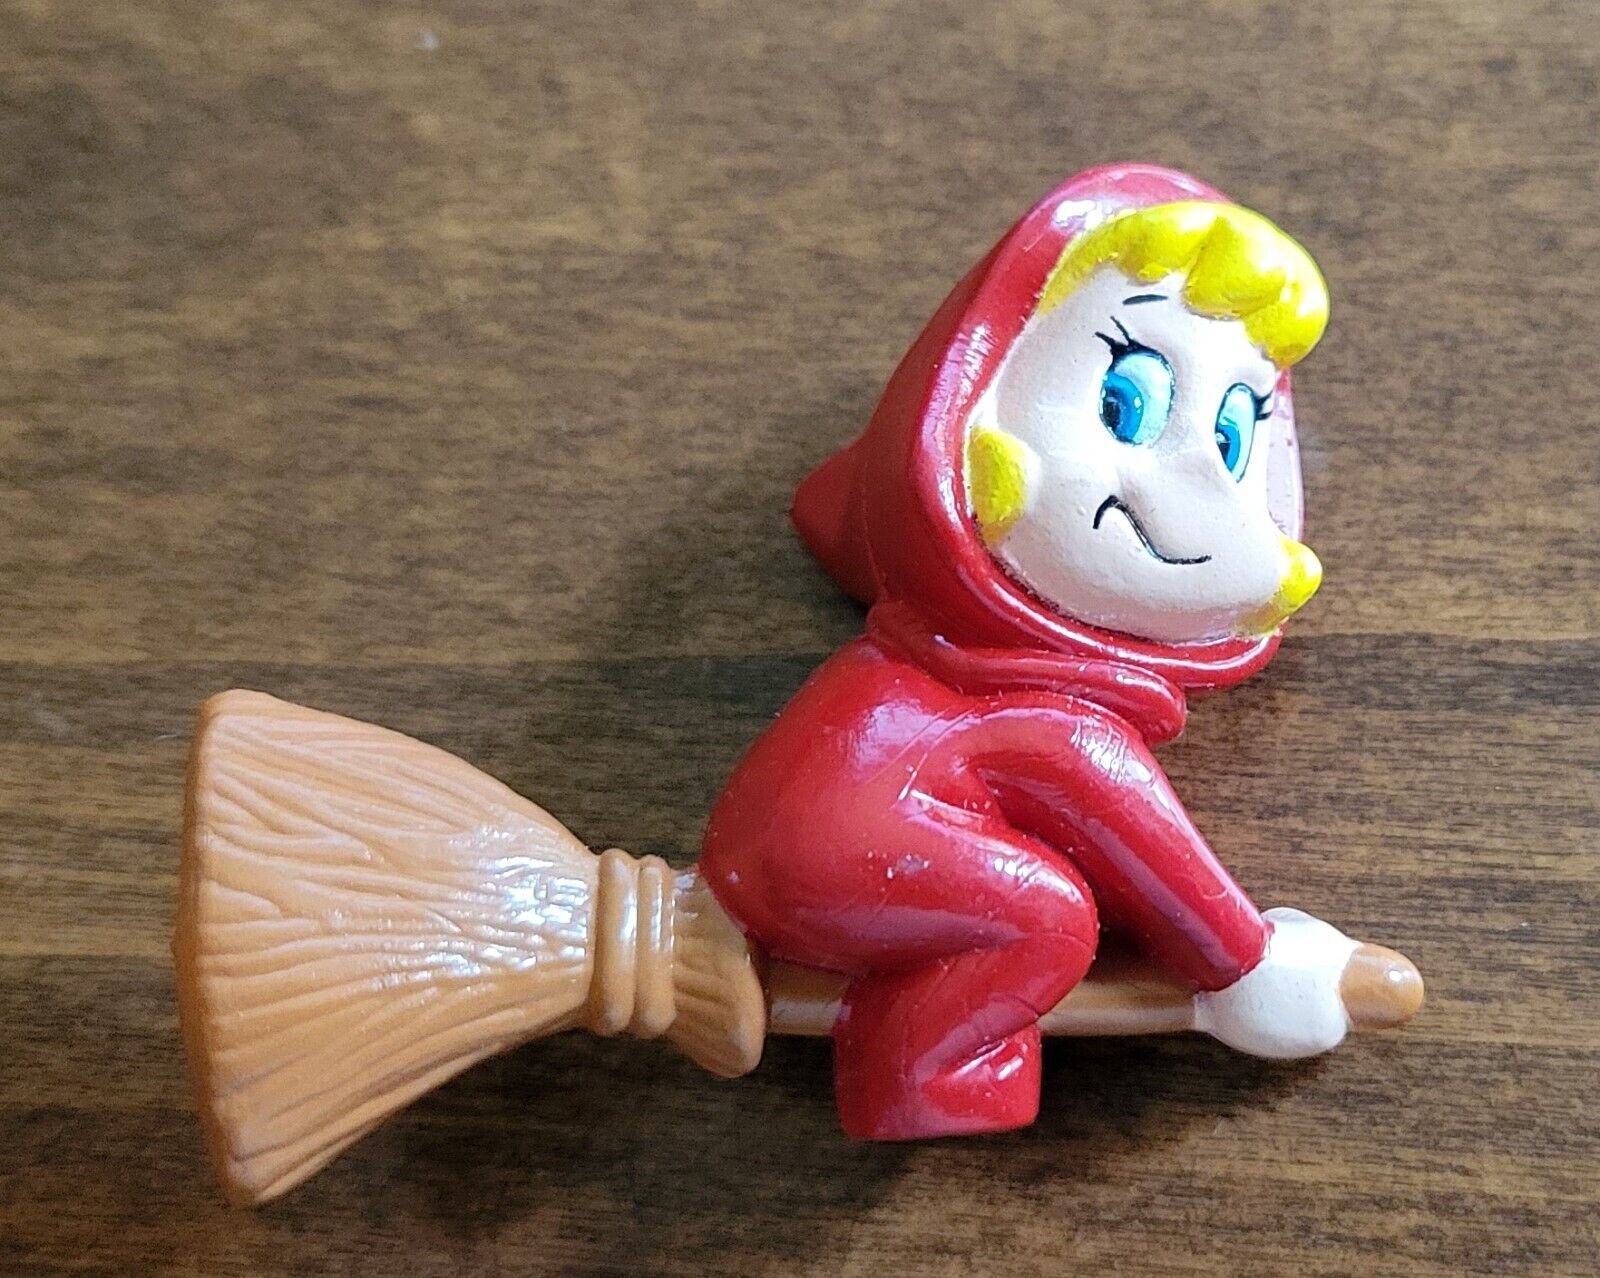 RARE Wendy the Good Little Witch from Casper the Friendly Ghost PVC figurine